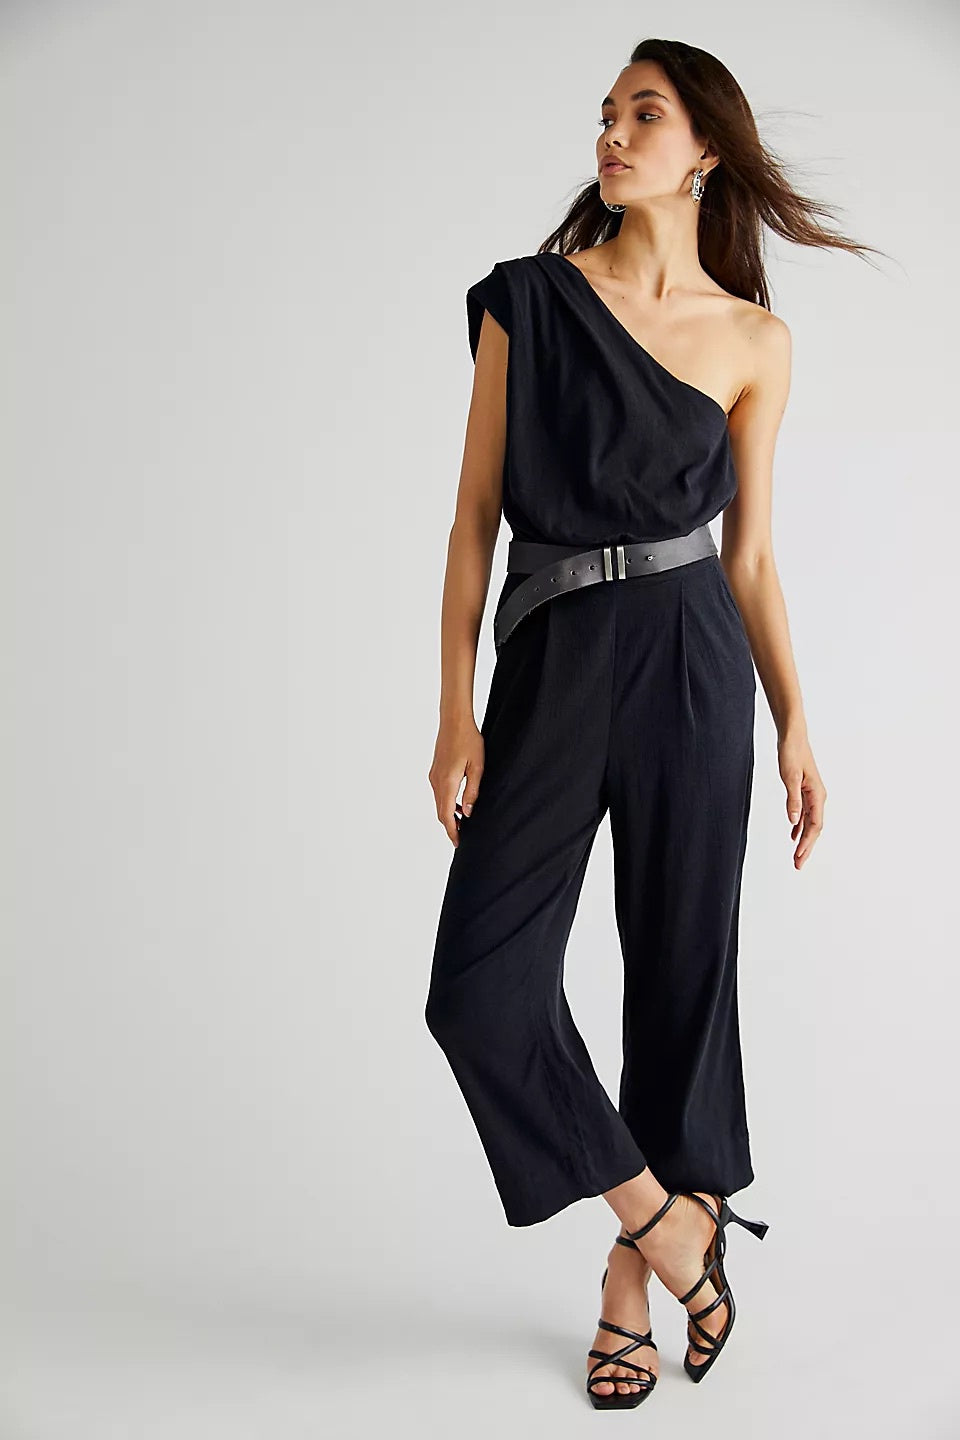 Free People Avery One Shoulder jumpsuit in black